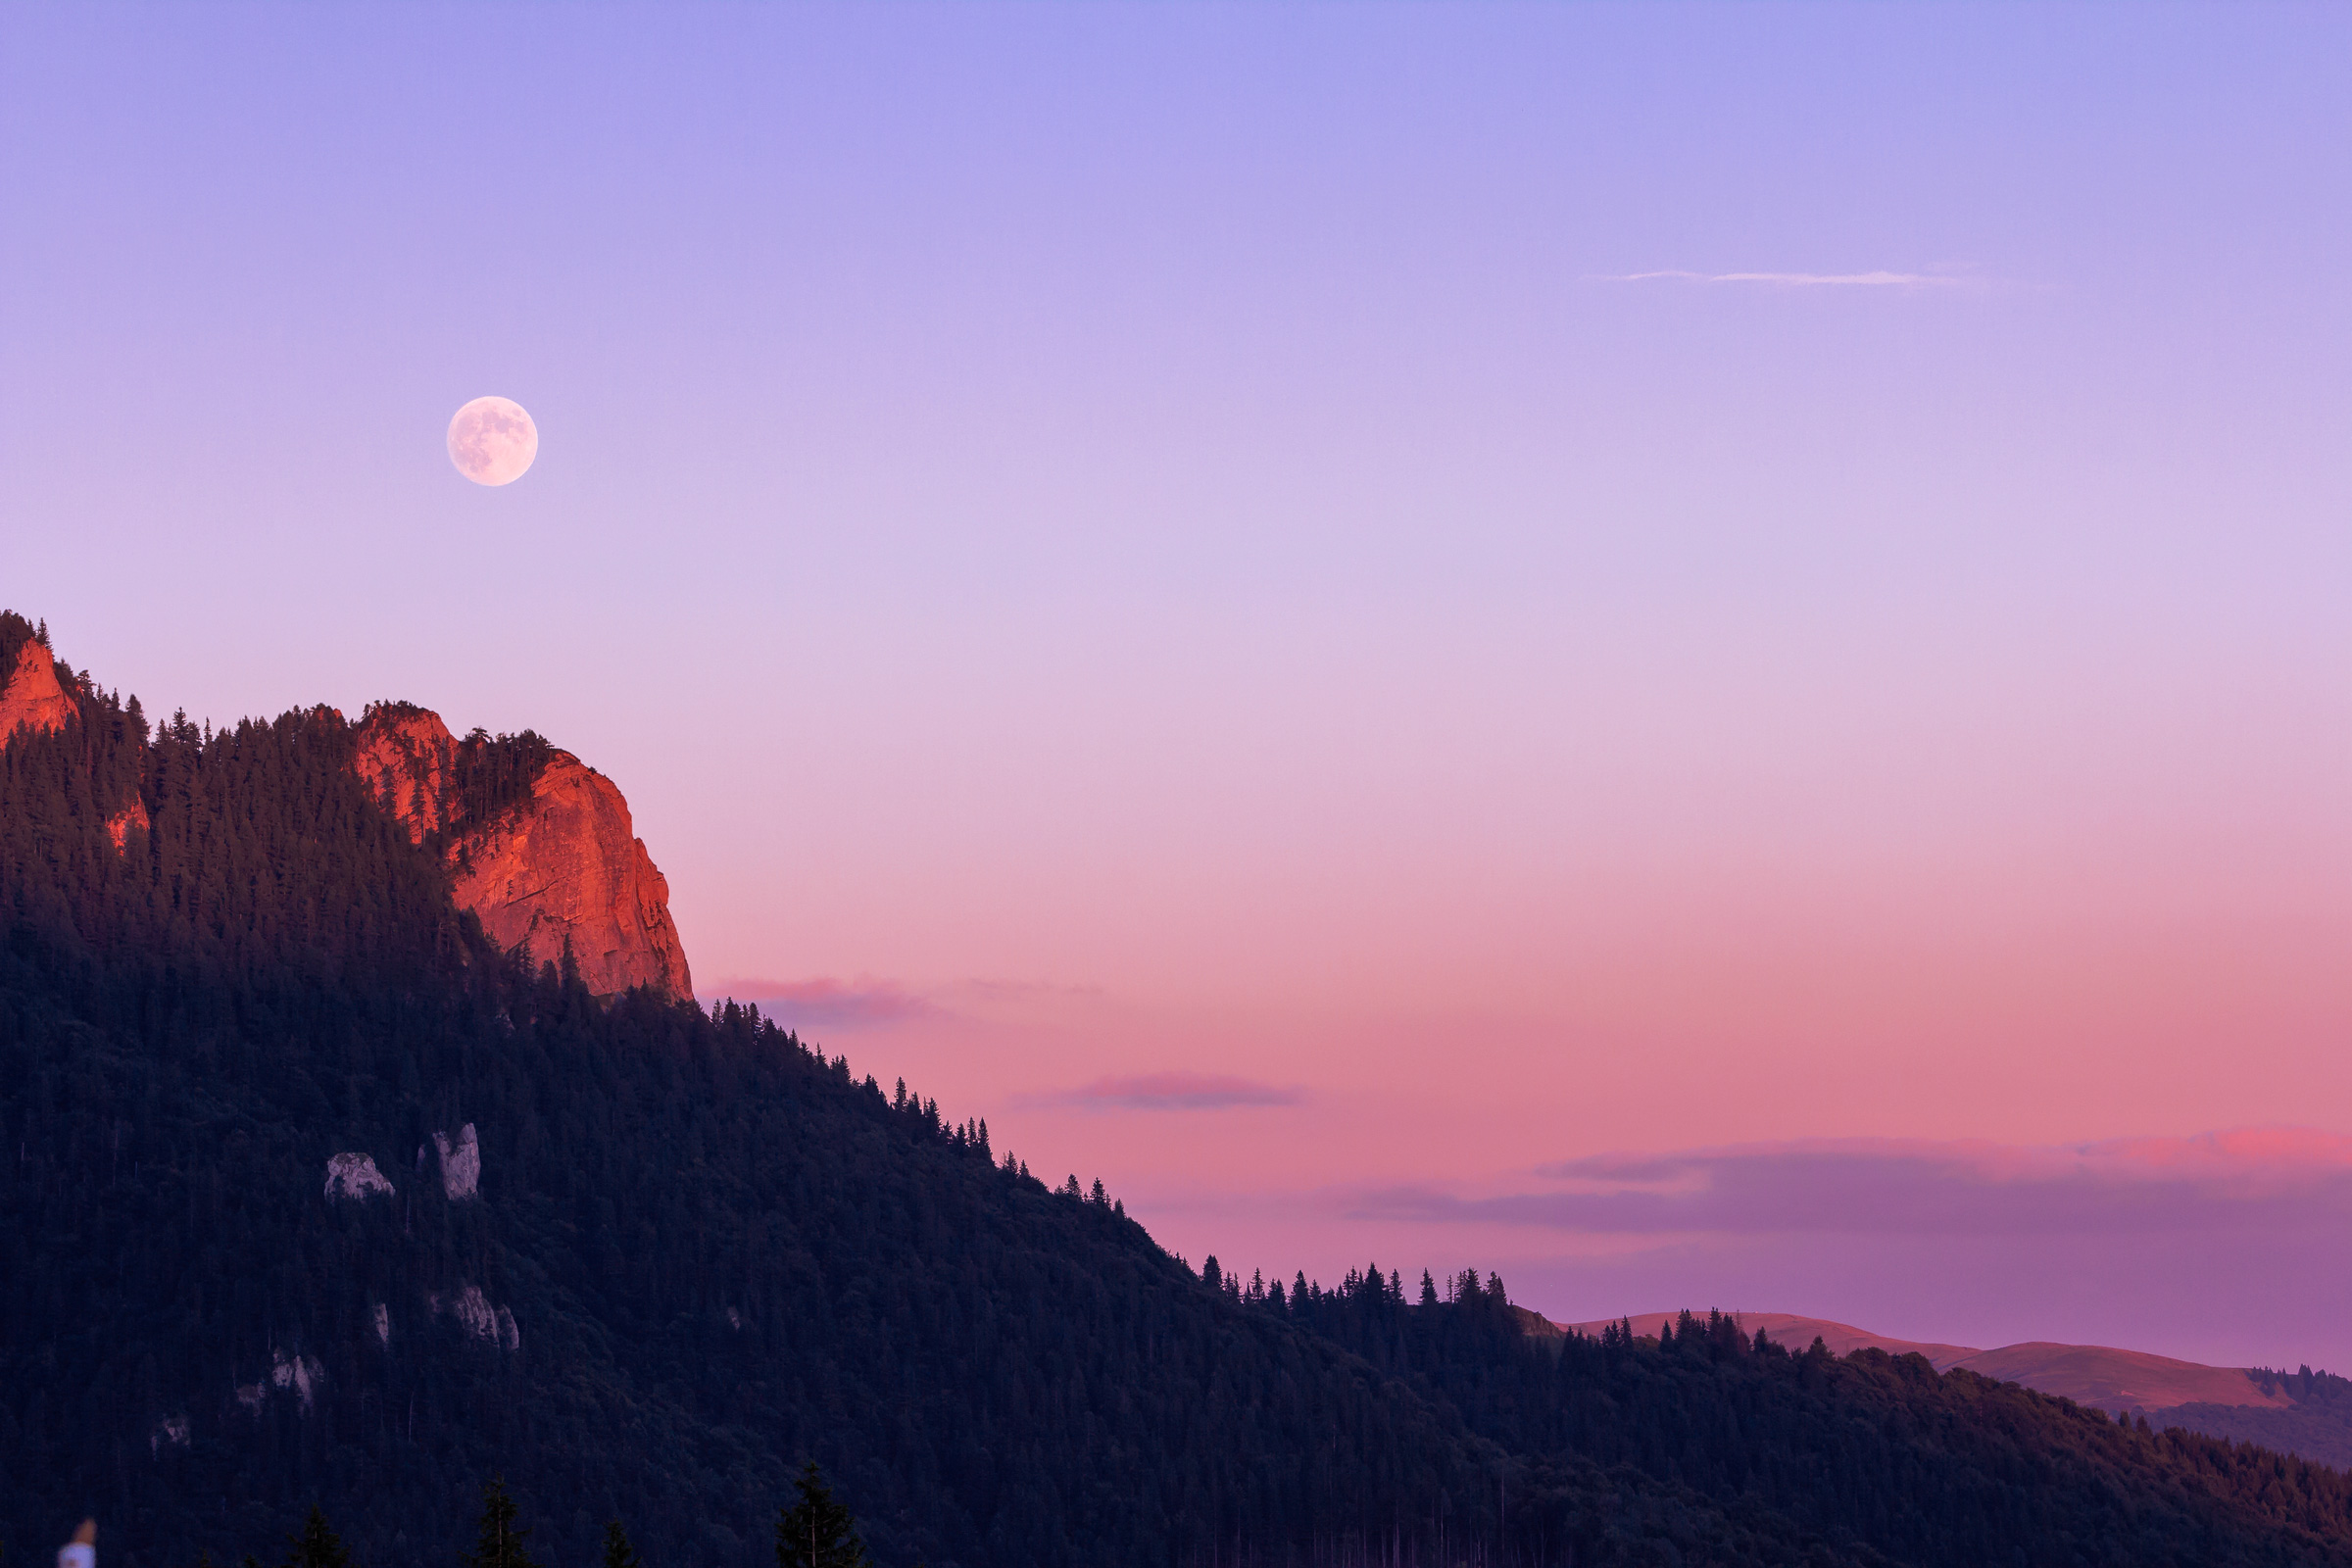 Sunset lit rockface with moon in the background